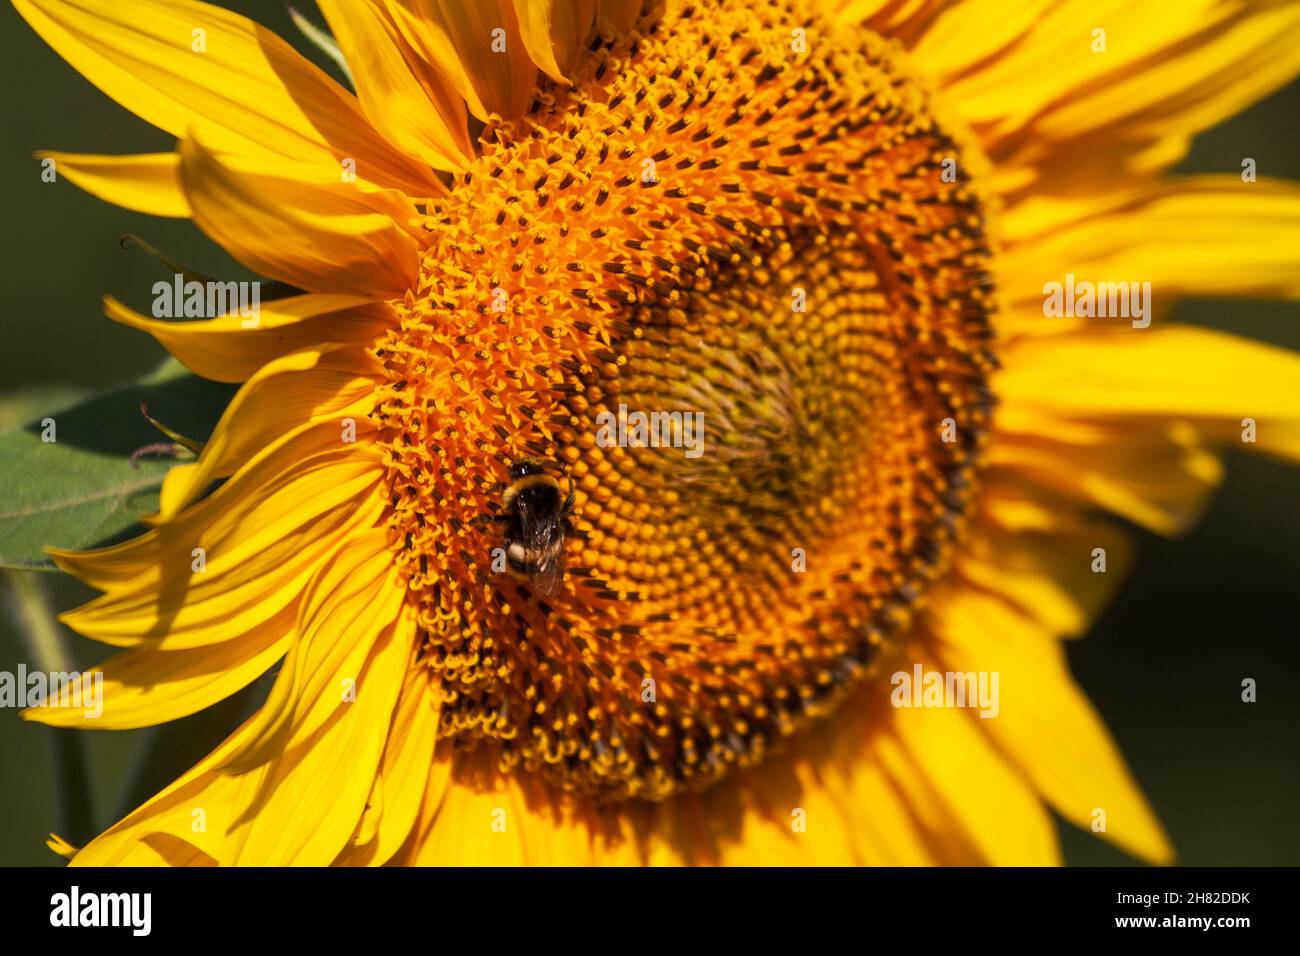 Blooming bright yellow sunflower. Sunflower field at the farm. Ripe sunflower seeds surrounded by yellow leaves in spring. Stock Photo